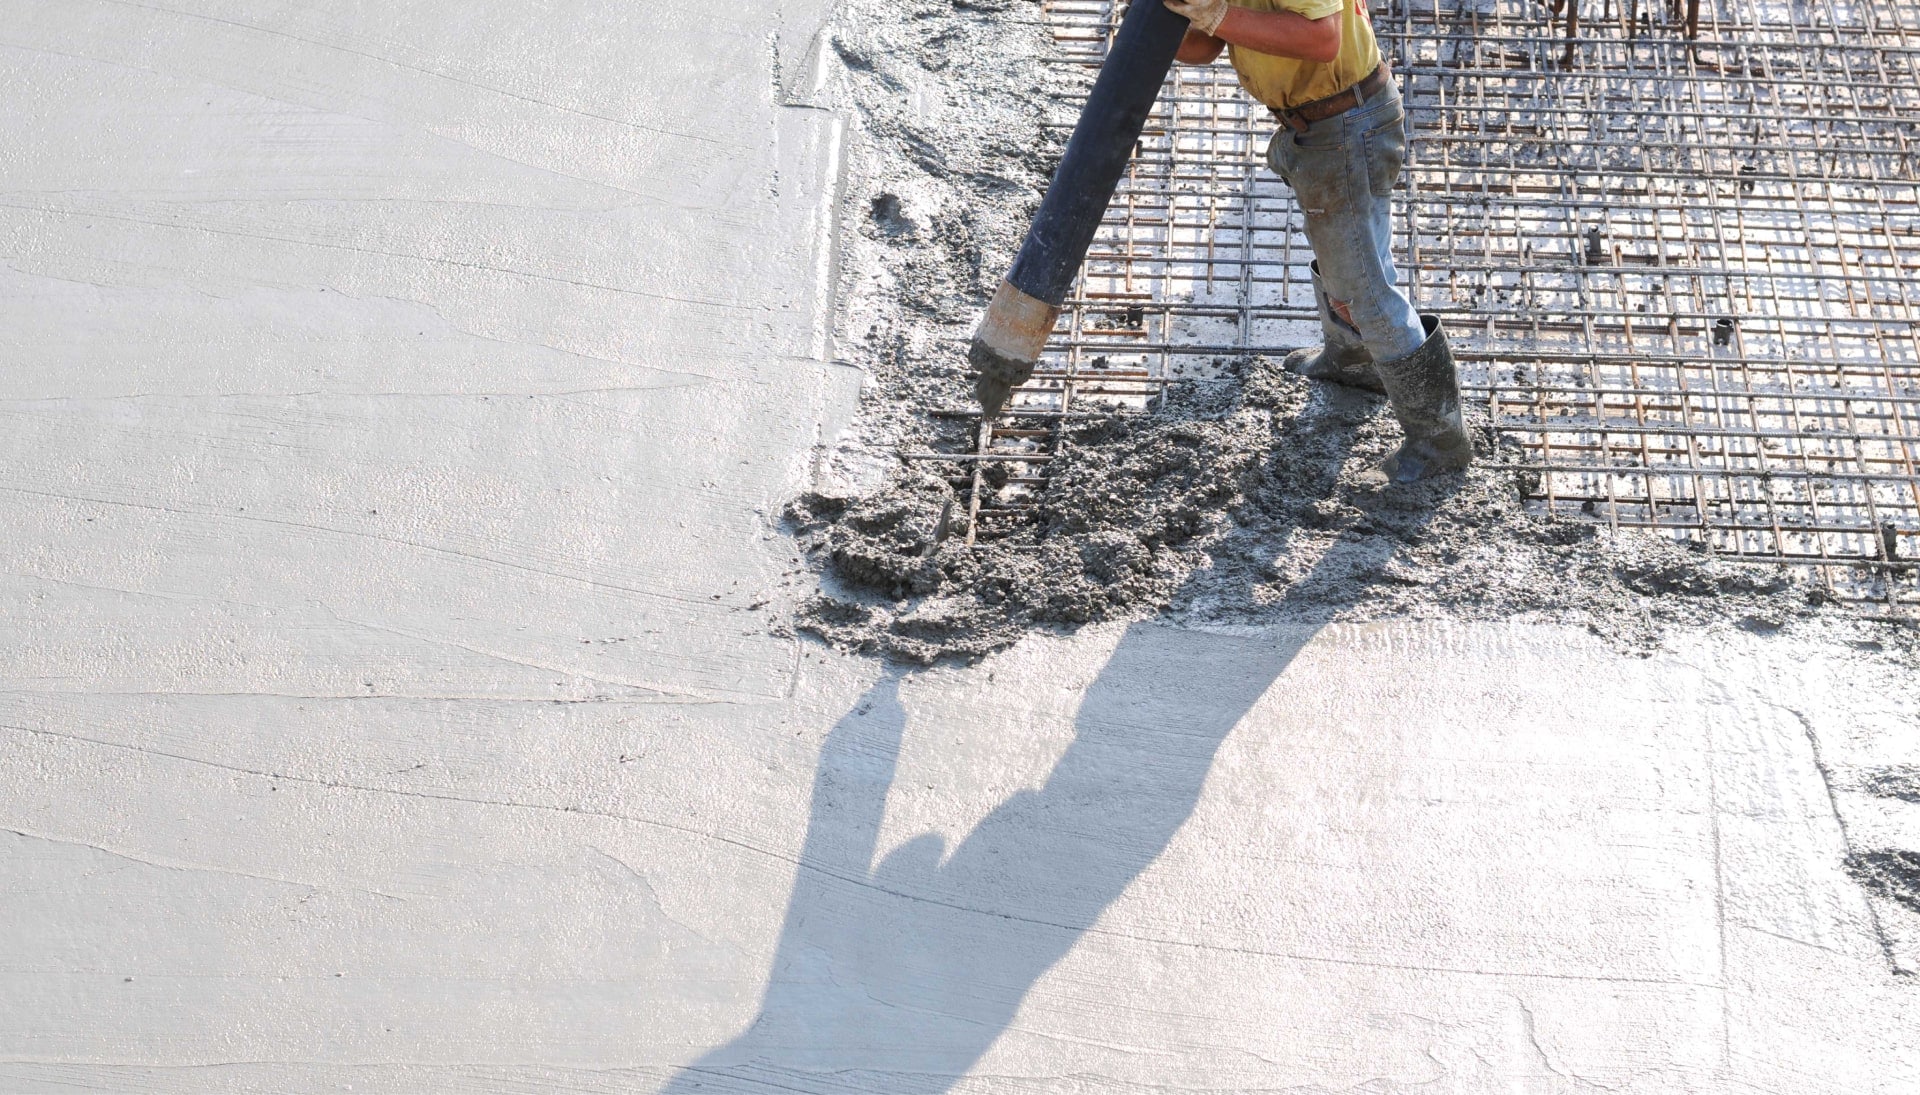 High-Quality Concrete Foundation Services in York, Pennsylvania area for Residential or Commercial Projects